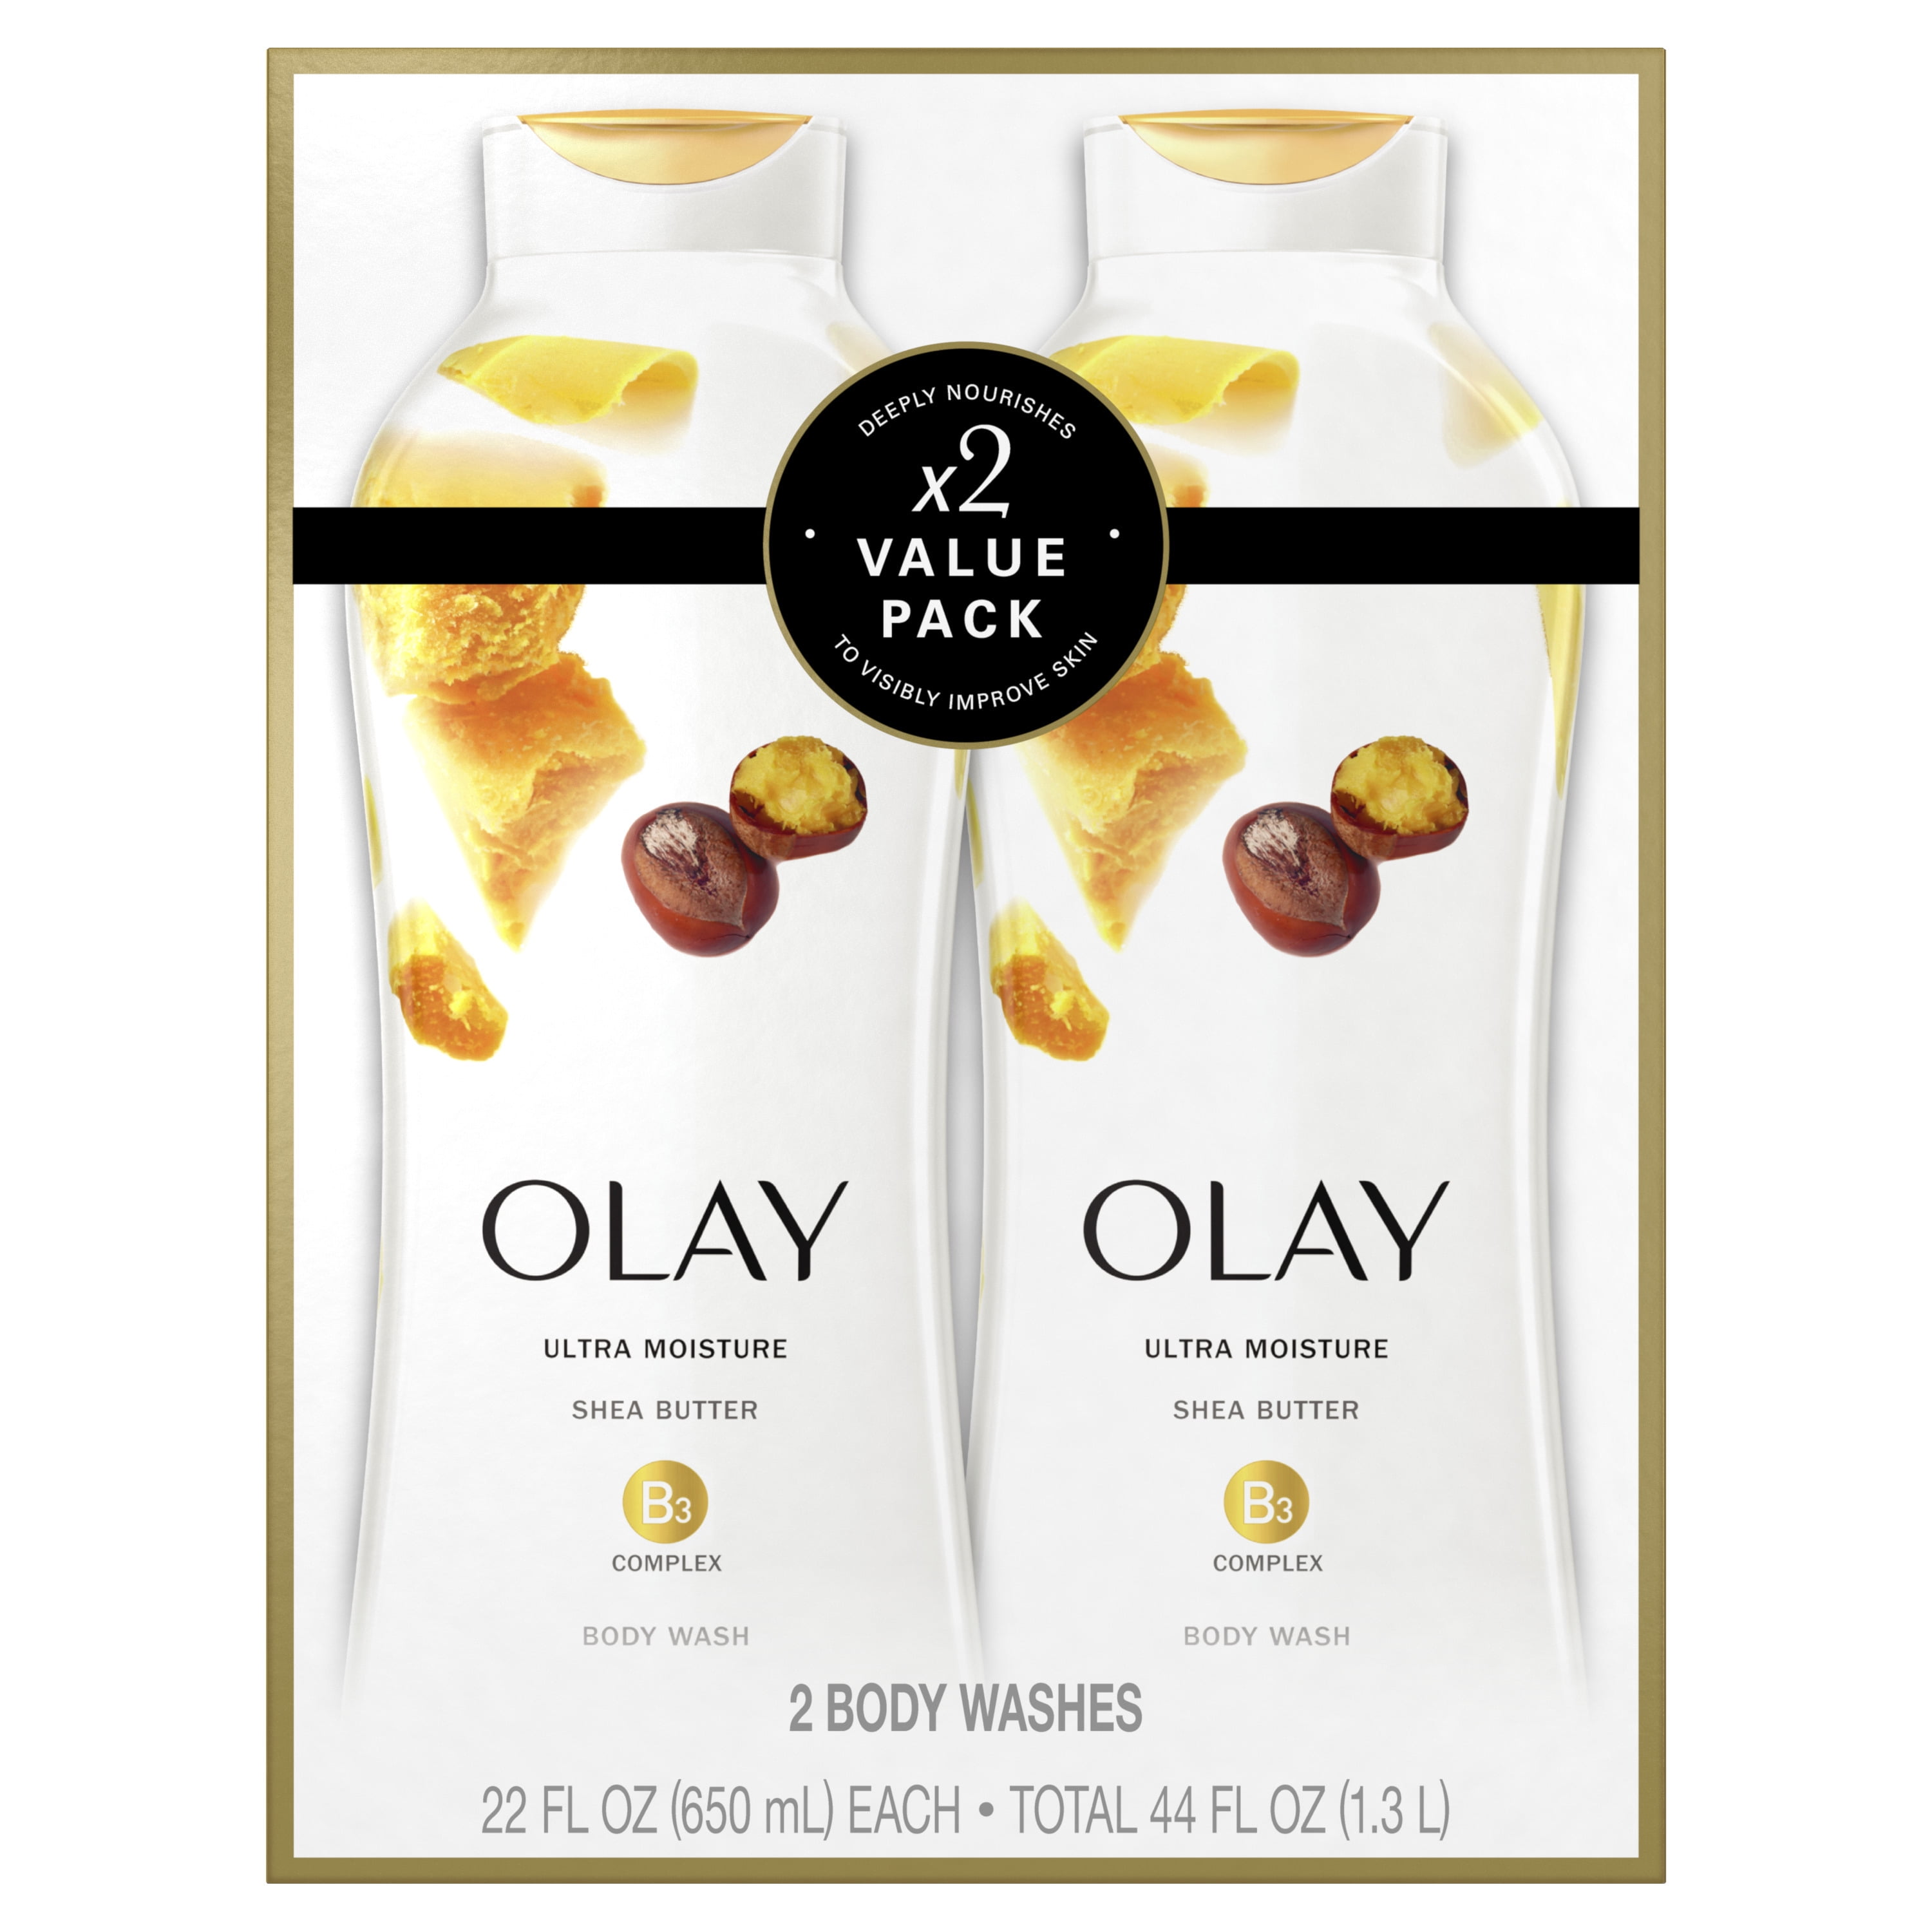 Olay Ultra Moisture Body Wash with Shea Butter, 22 fl oz, Pack of 2